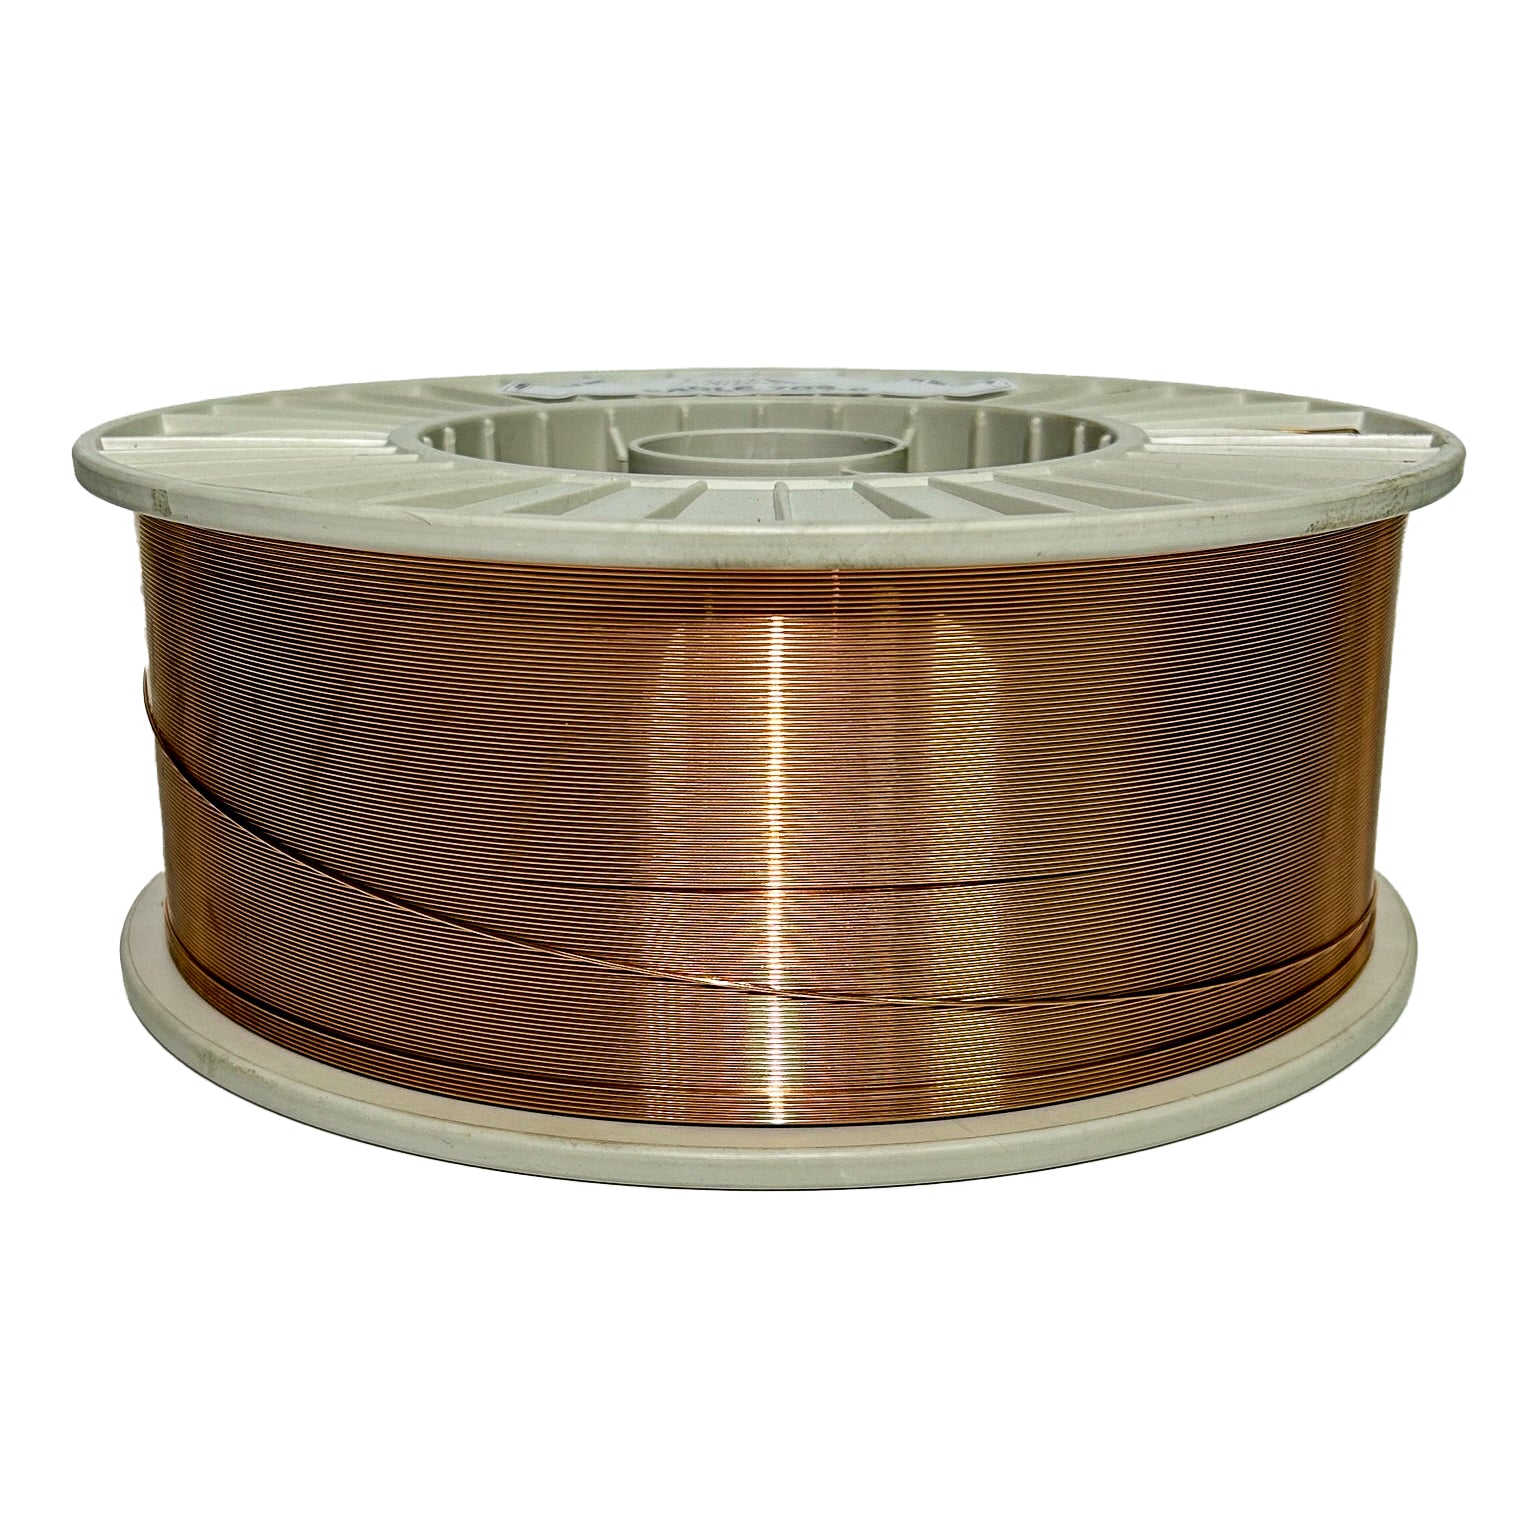 EAGLE E70S-6 Copper Coated Gas Shielded All Position Wire For Joining Low Carbon Steel.